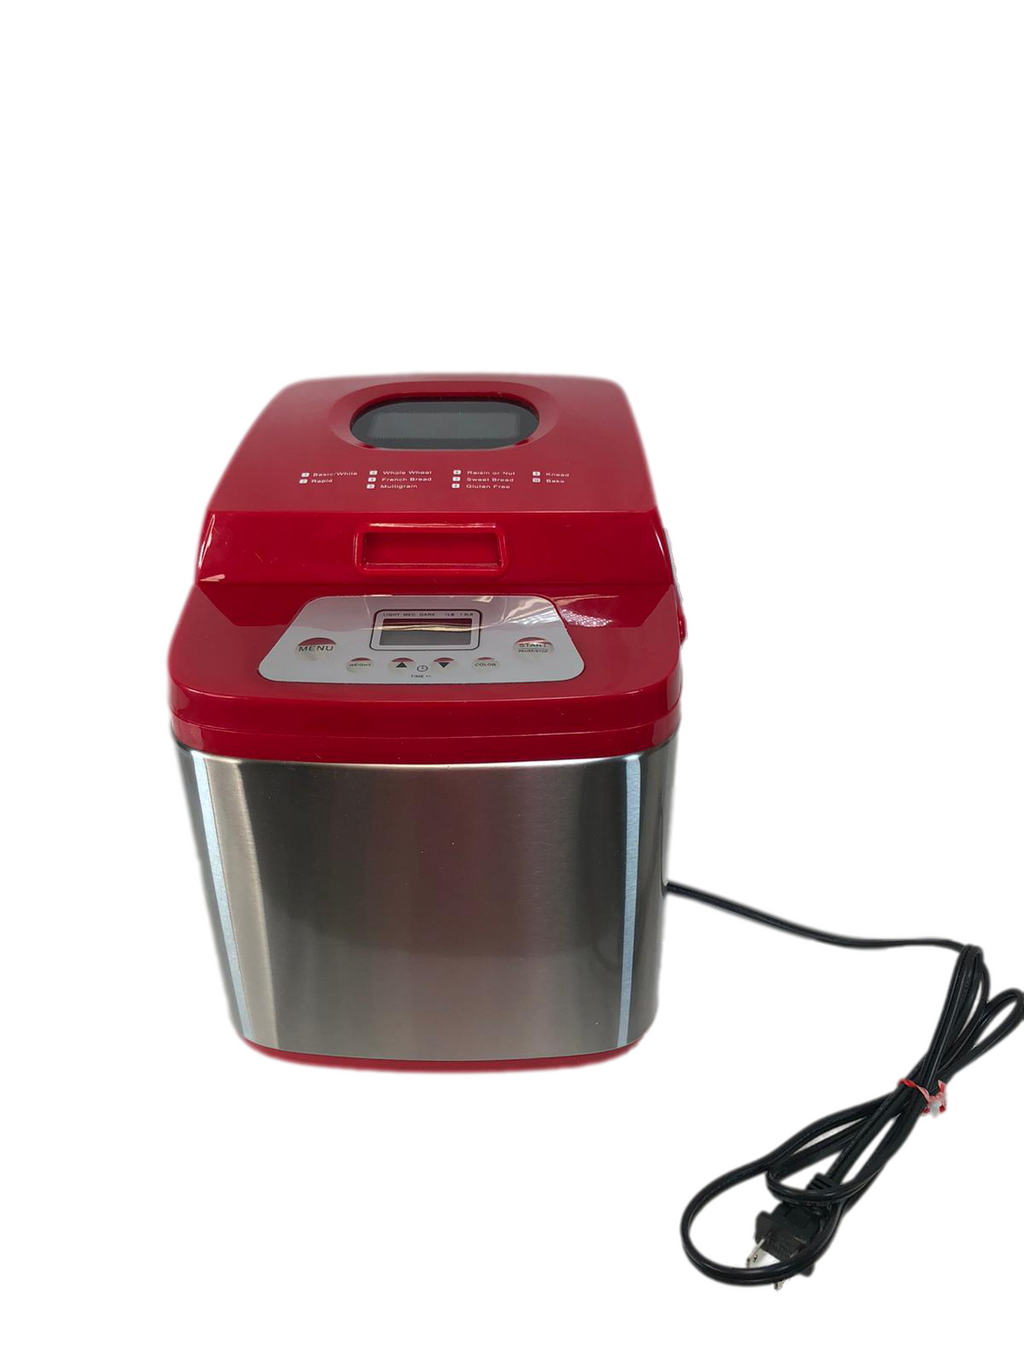 "As is" Cook's Essentials 1.5-lb Stainless Steel Breadmaker